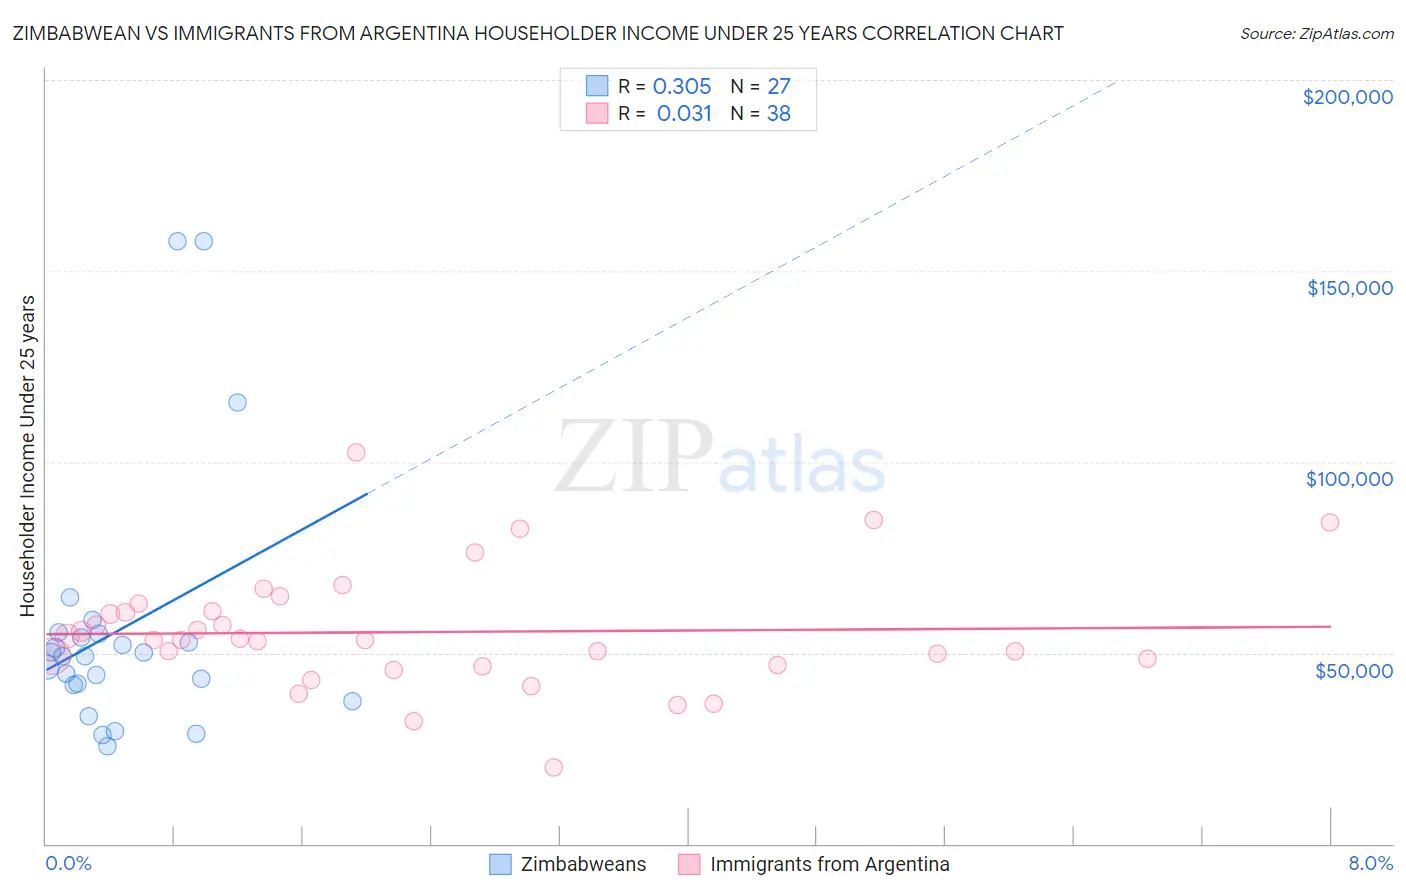 Zimbabwean vs Immigrants from Argentina Householder Income Under 25 years